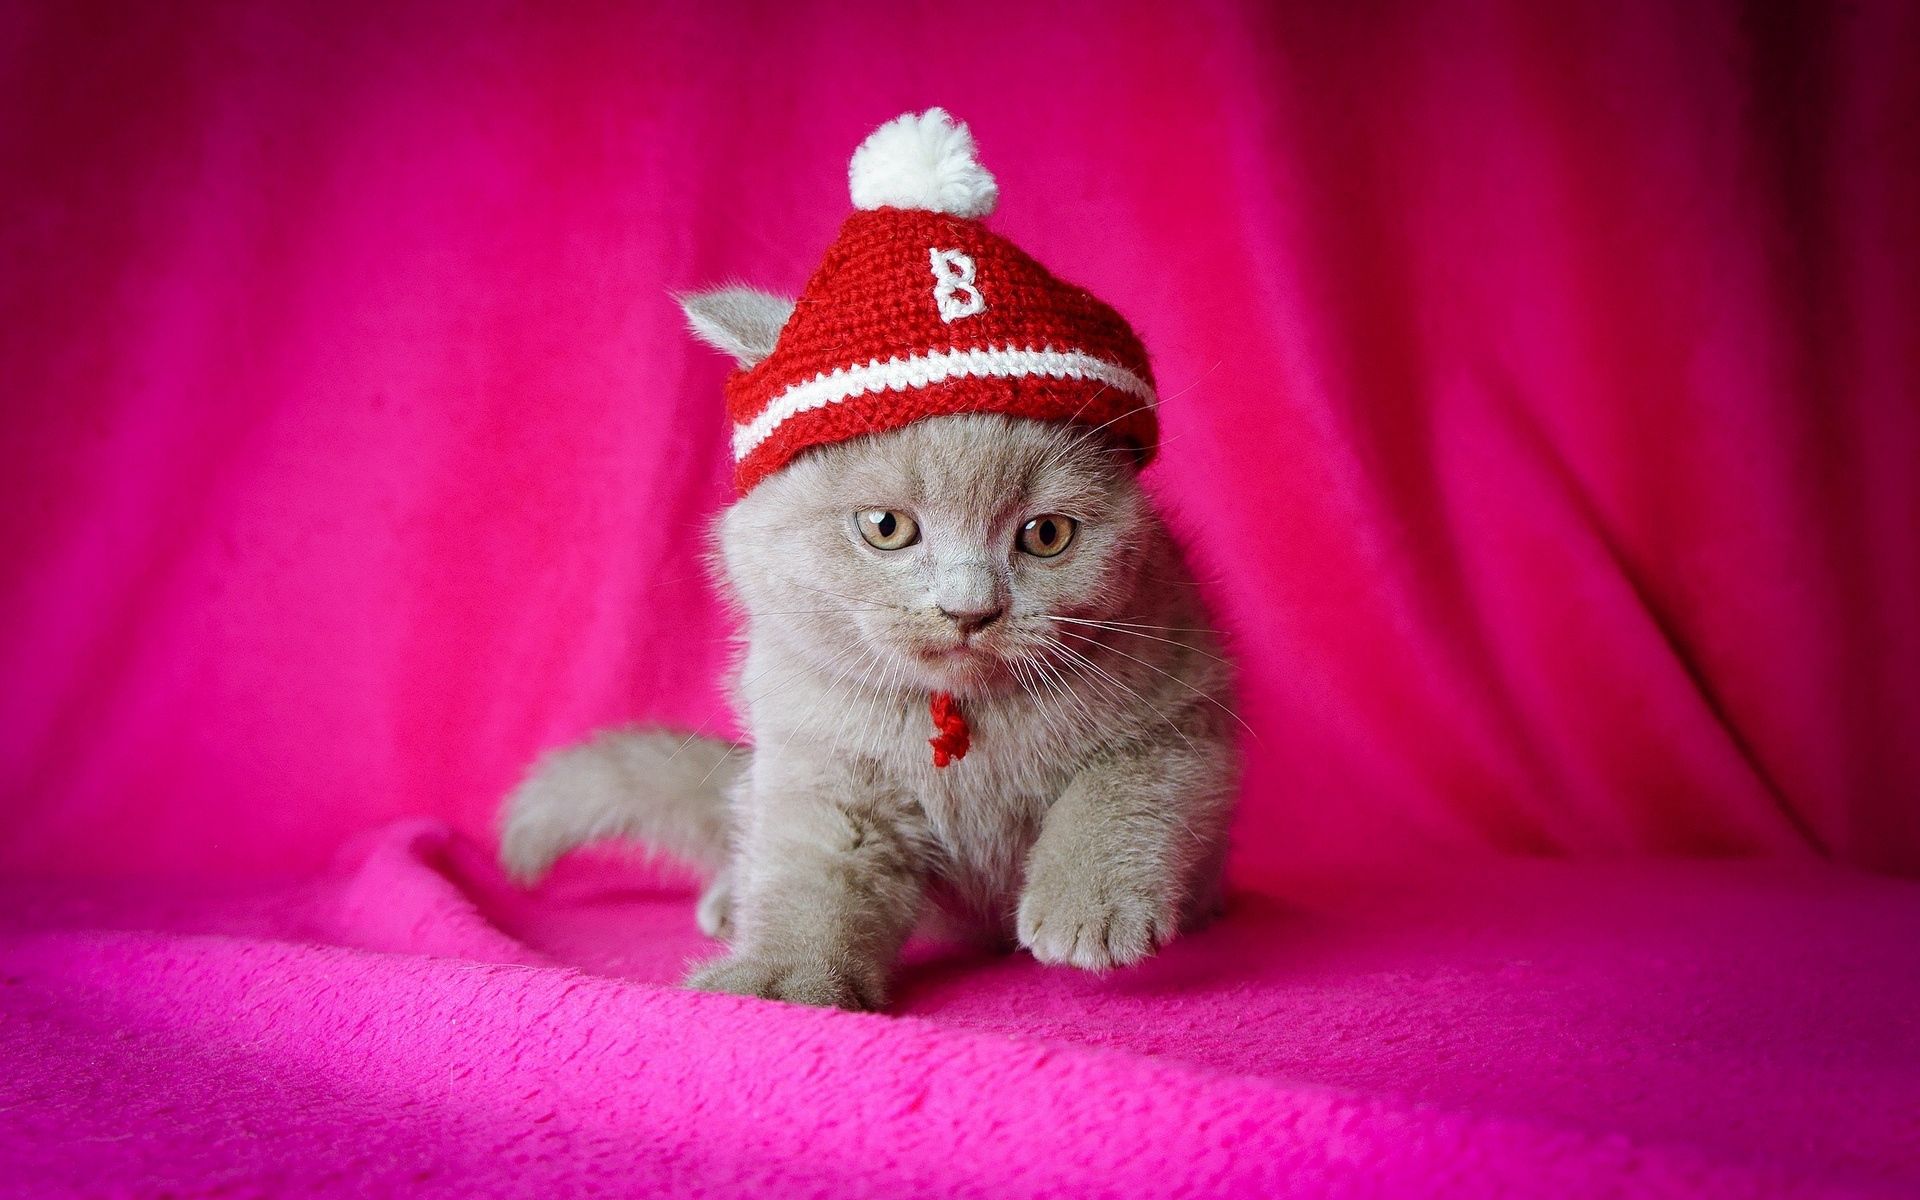 57724 3840x2160 PC pictures for free, download tot, kitten, kitty, sit 3840x2160 wallpapers on your desktop